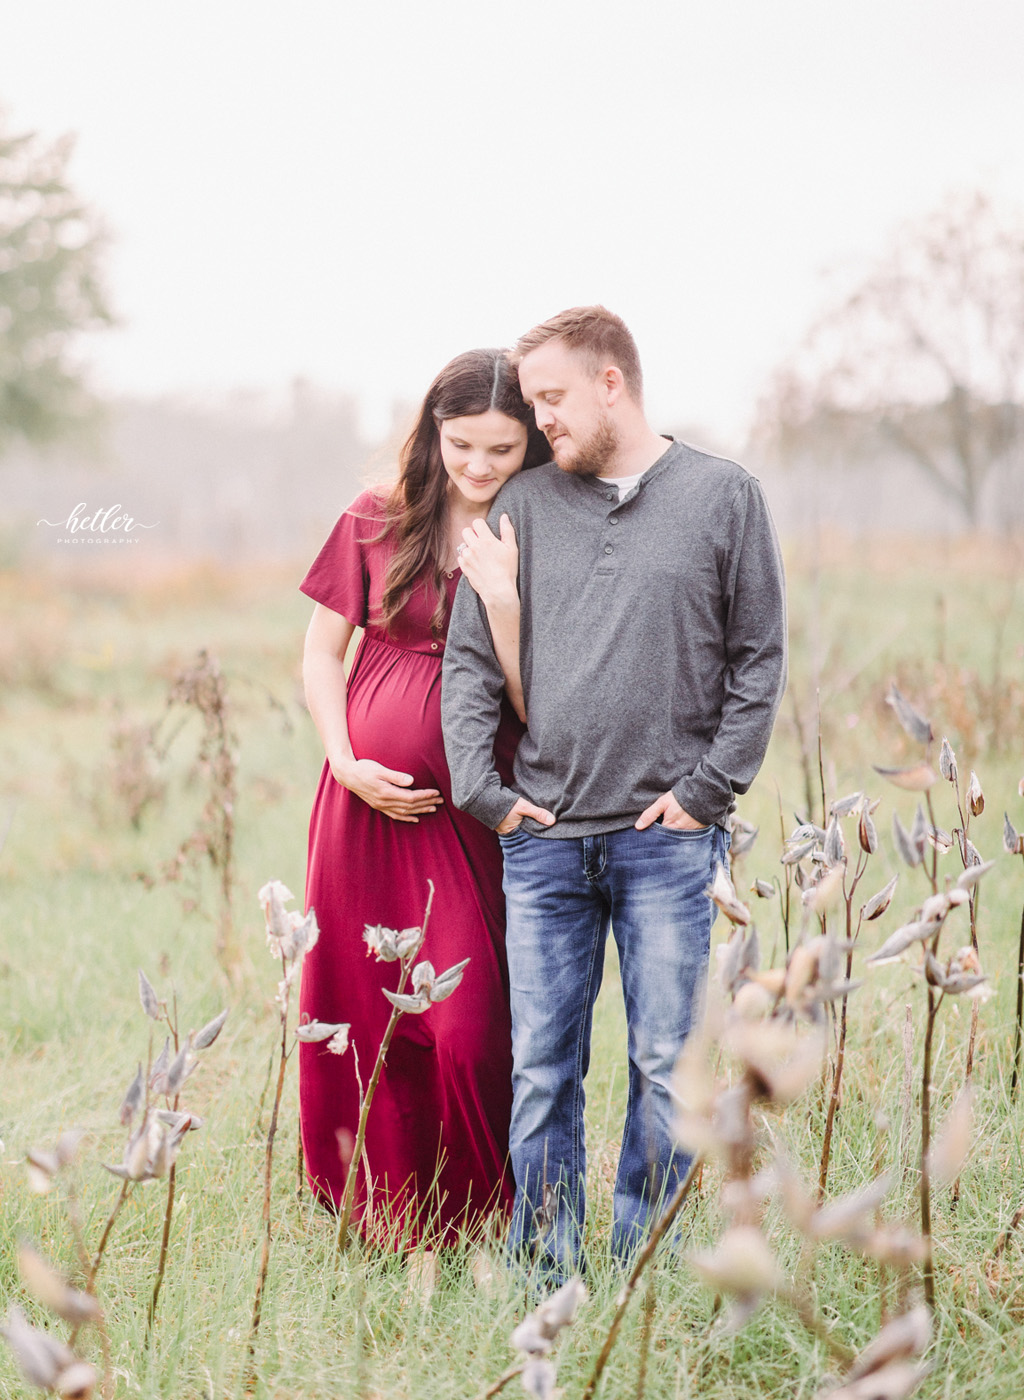 Grand Rapids maternity photo session at The Highlands on a rainy fall evening